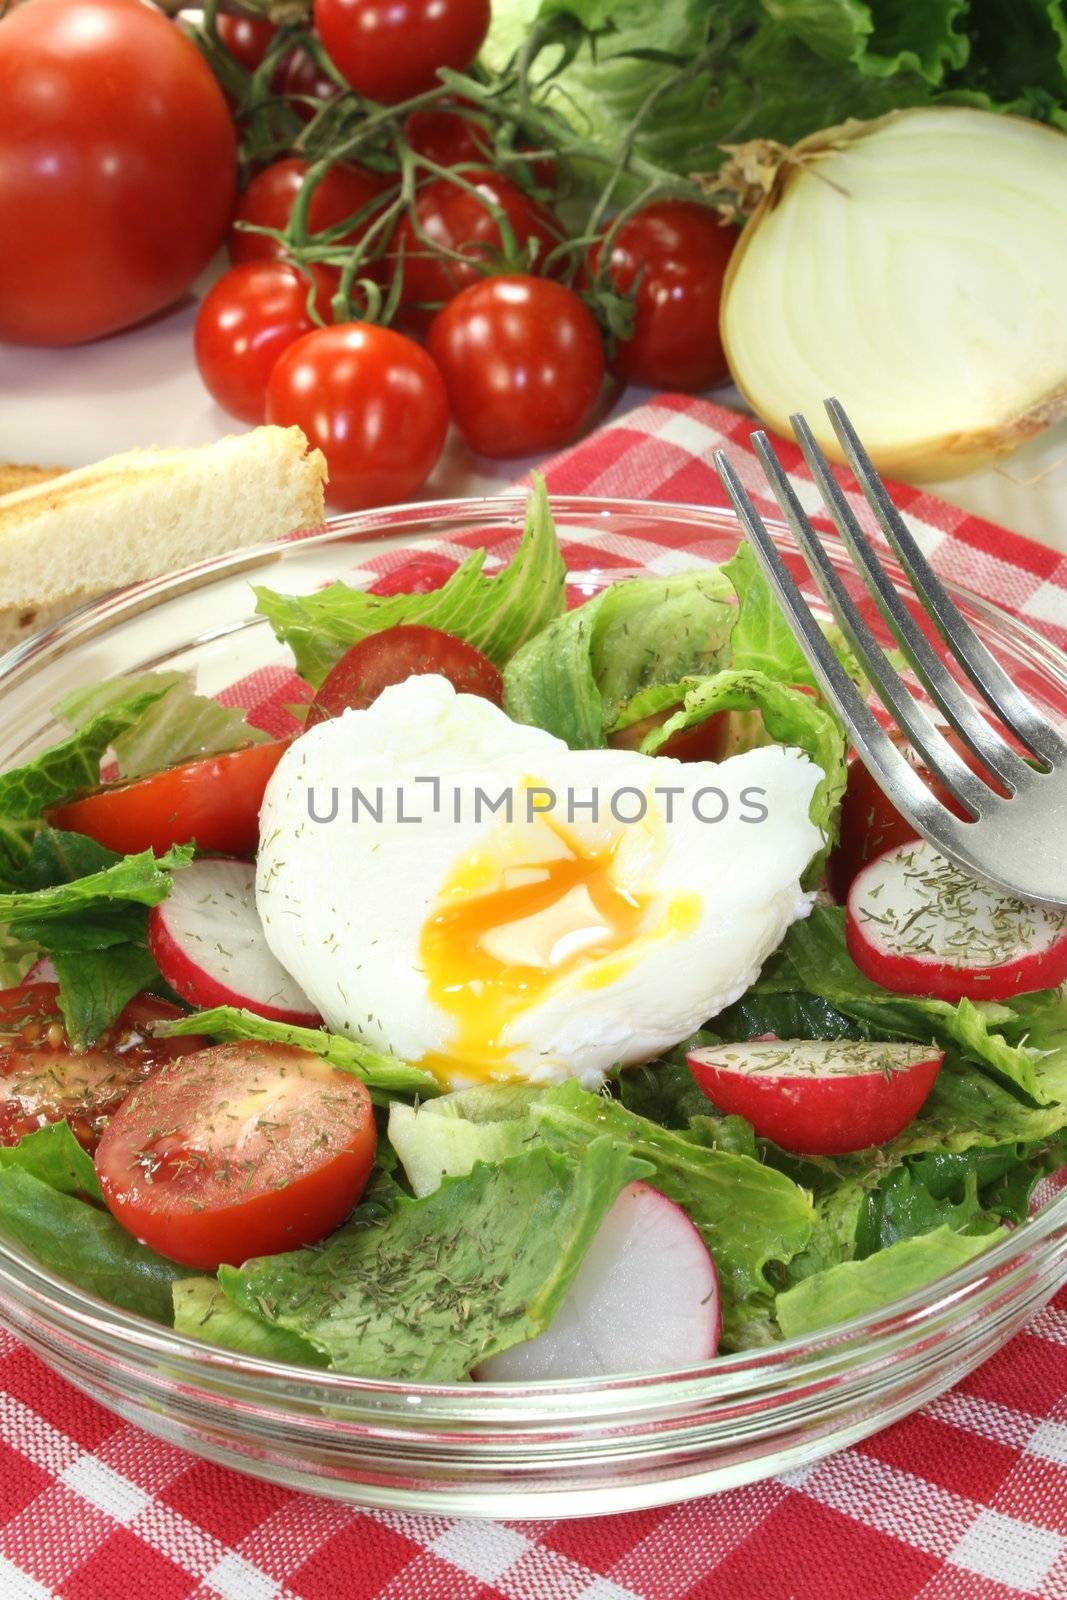 Salad with poached egg and onions by discovery